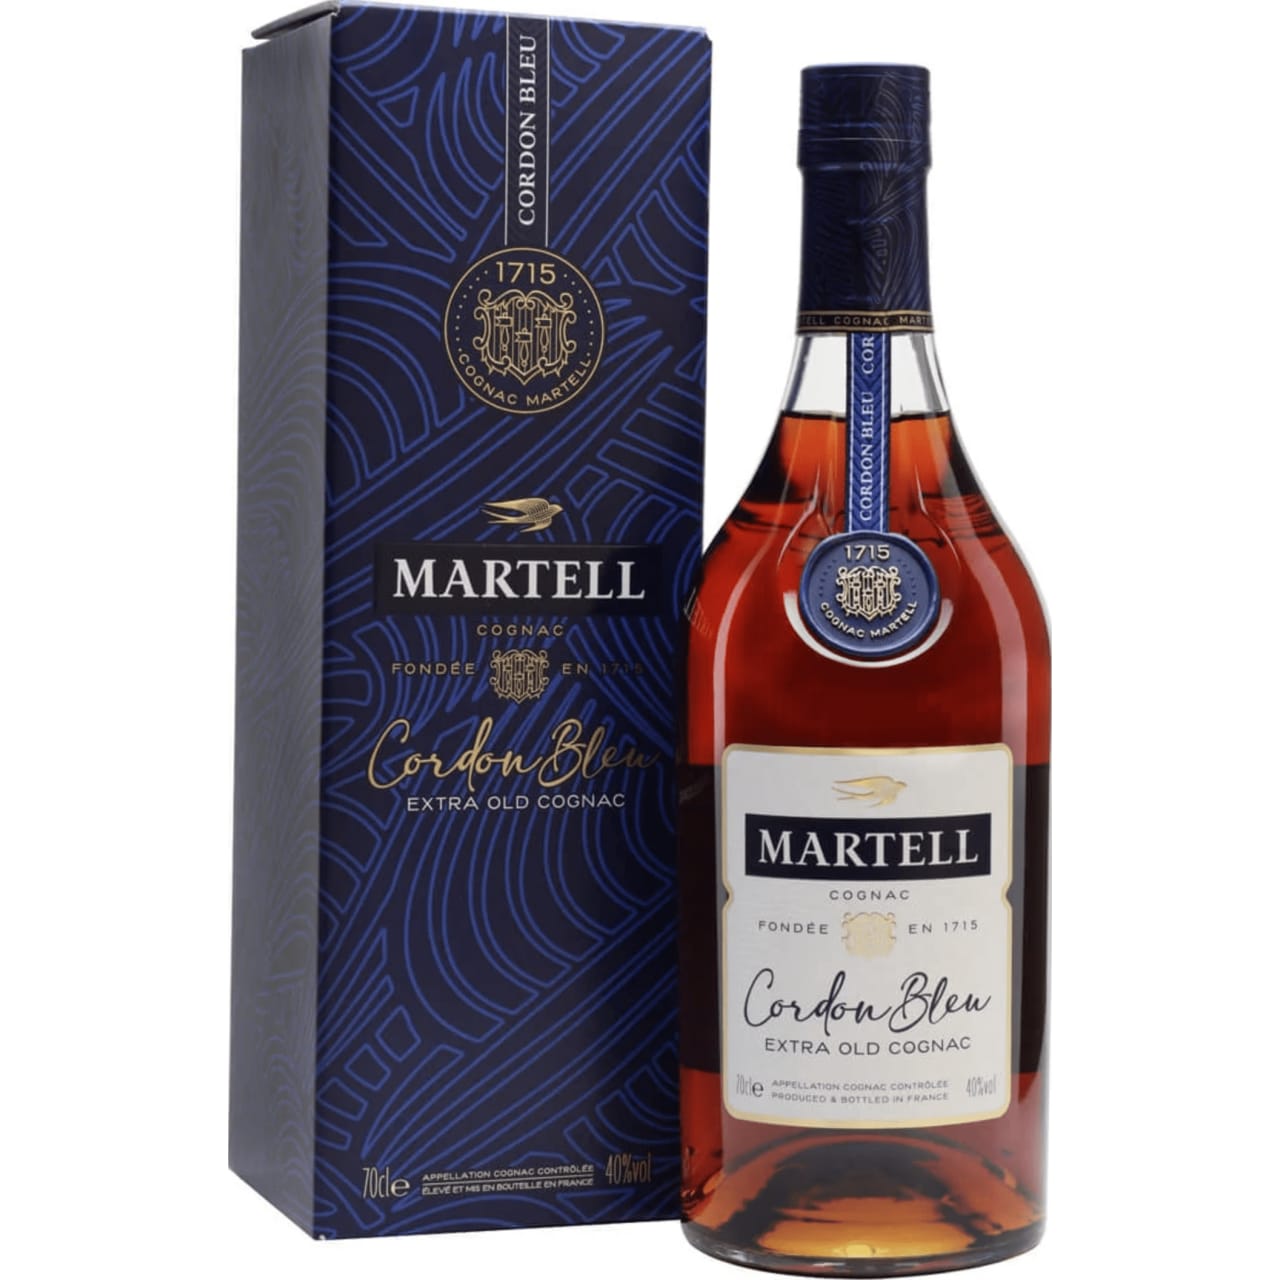 Created in 1912 by Edouard Martell and first launched at the renowned Hotel de Paris in Monaco. Cordon Bleu was the first post-phylloxera cognac to be released by Martell and is something of a flagship for the brand, characterising the 'typical' house style of Martell Cognac.